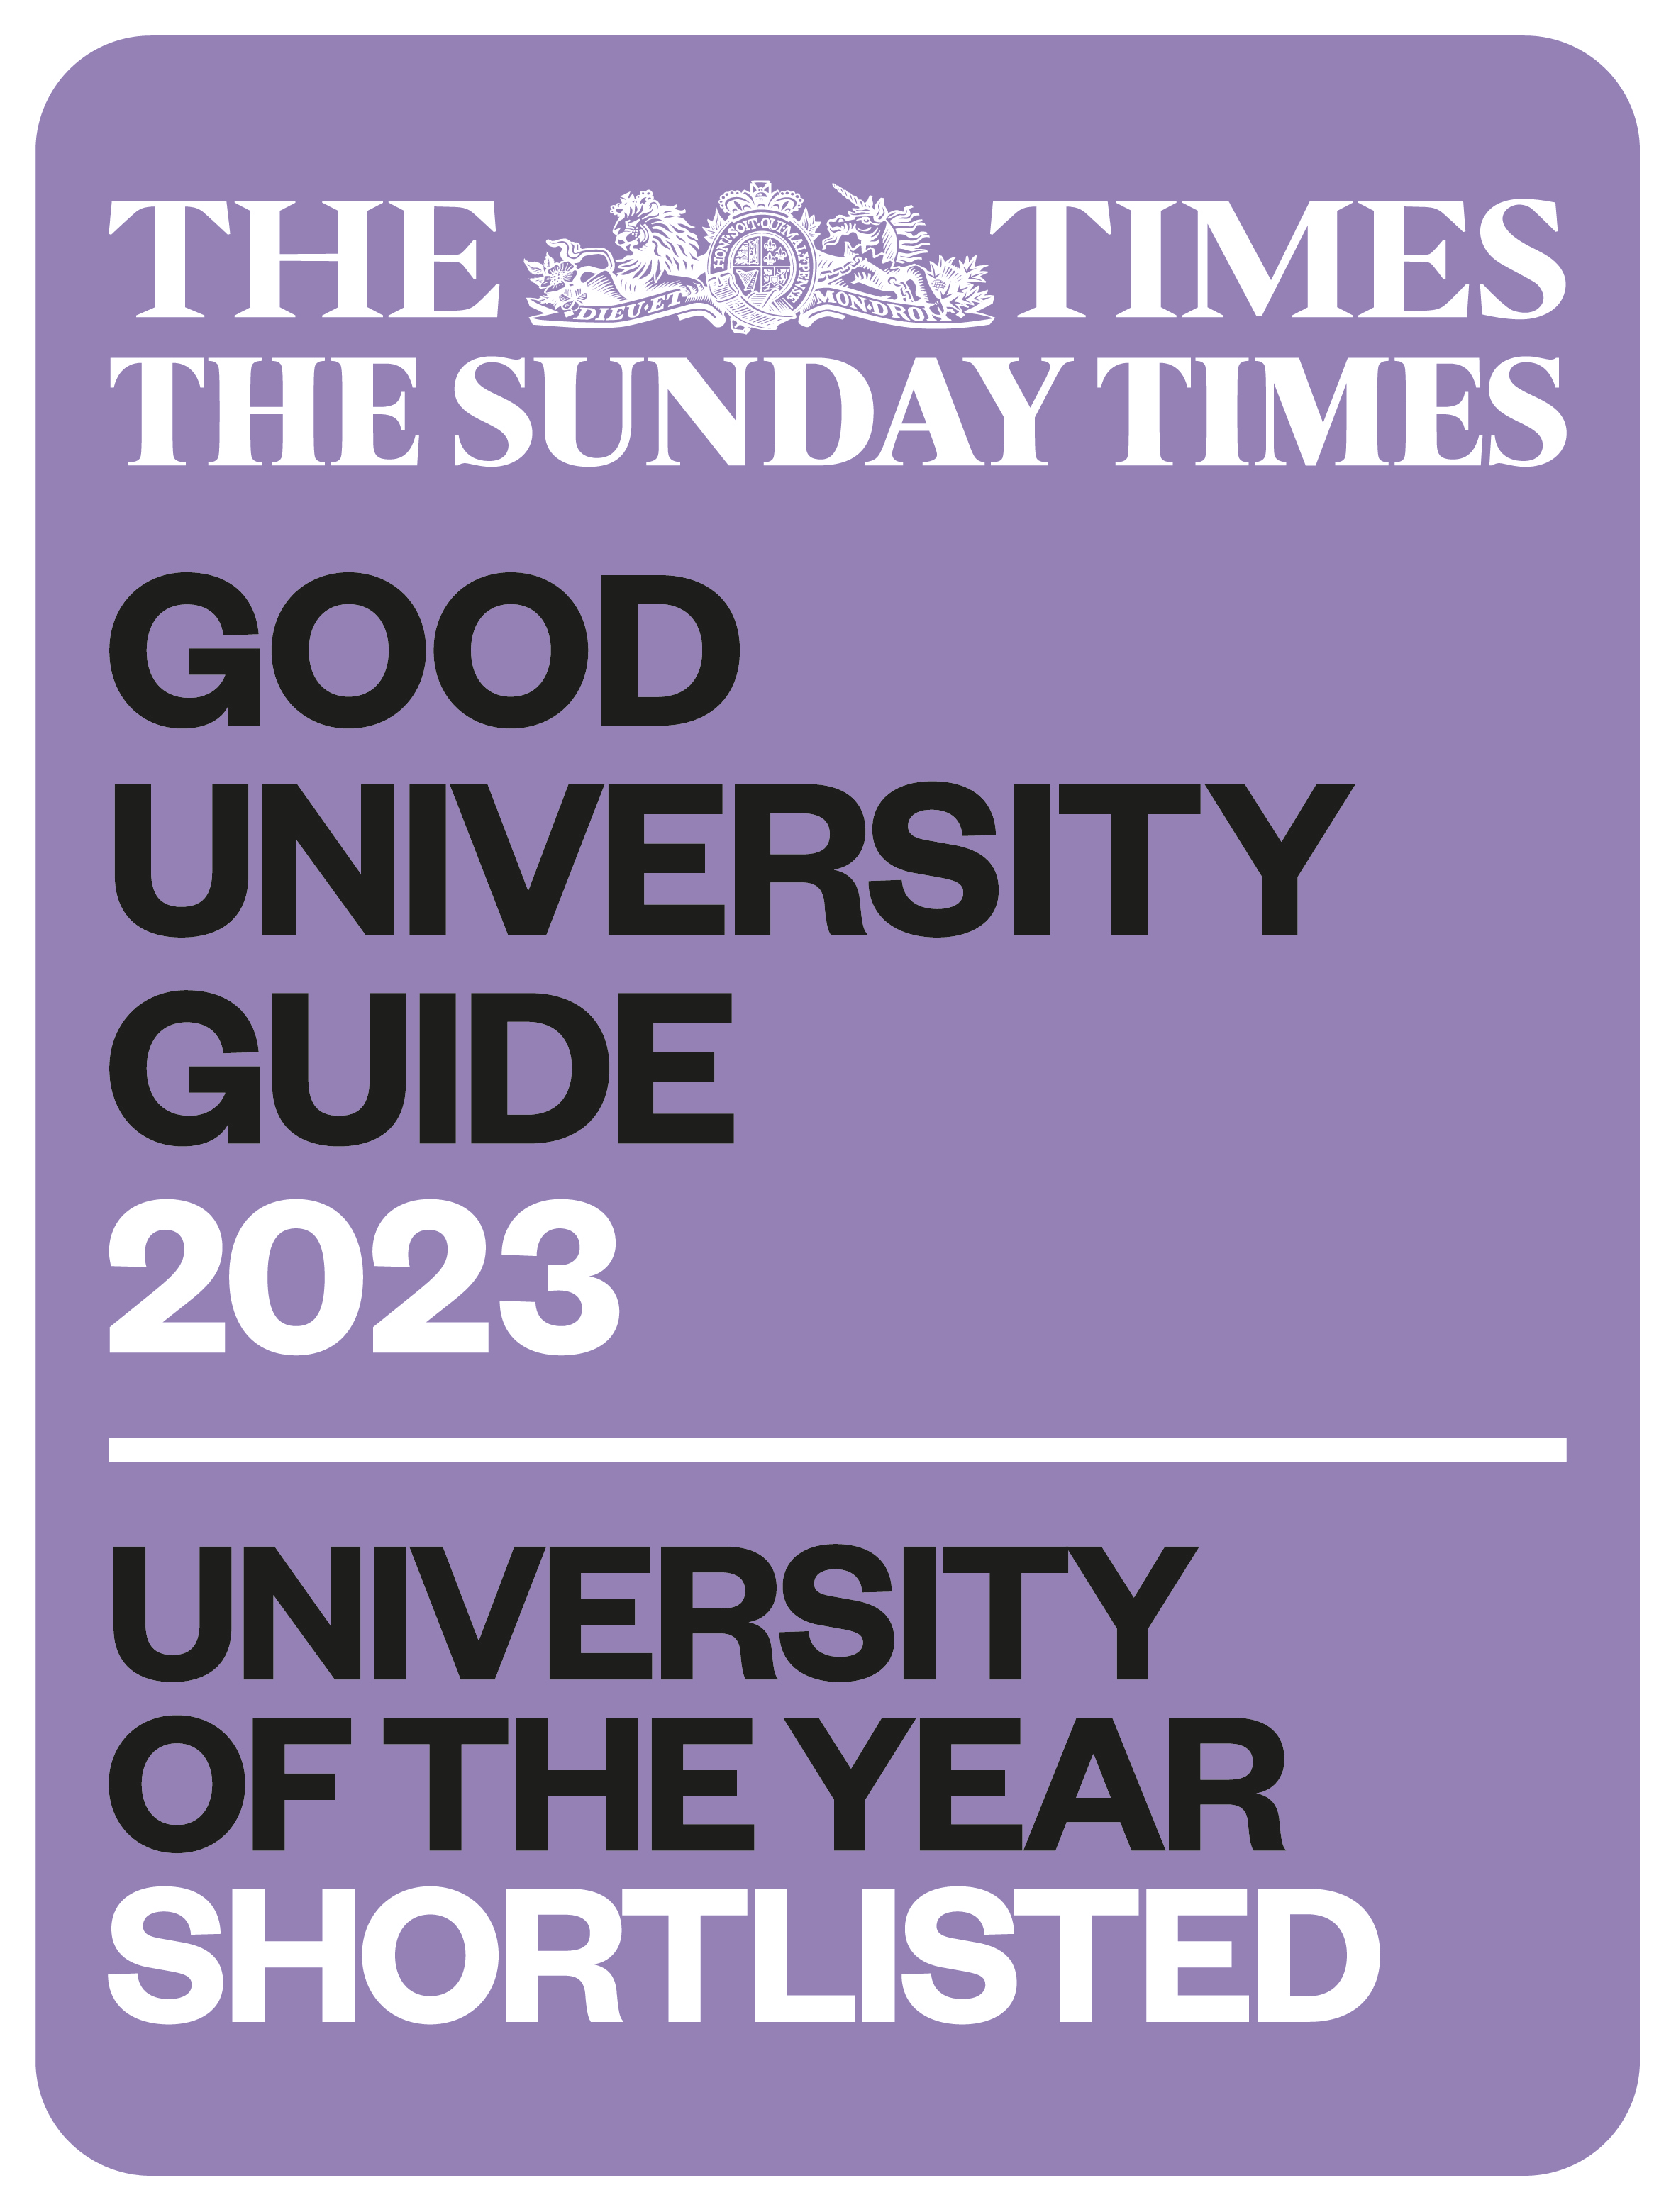 The Times/Sunday Times Good University Guide 2023, University of the Year shortlisted